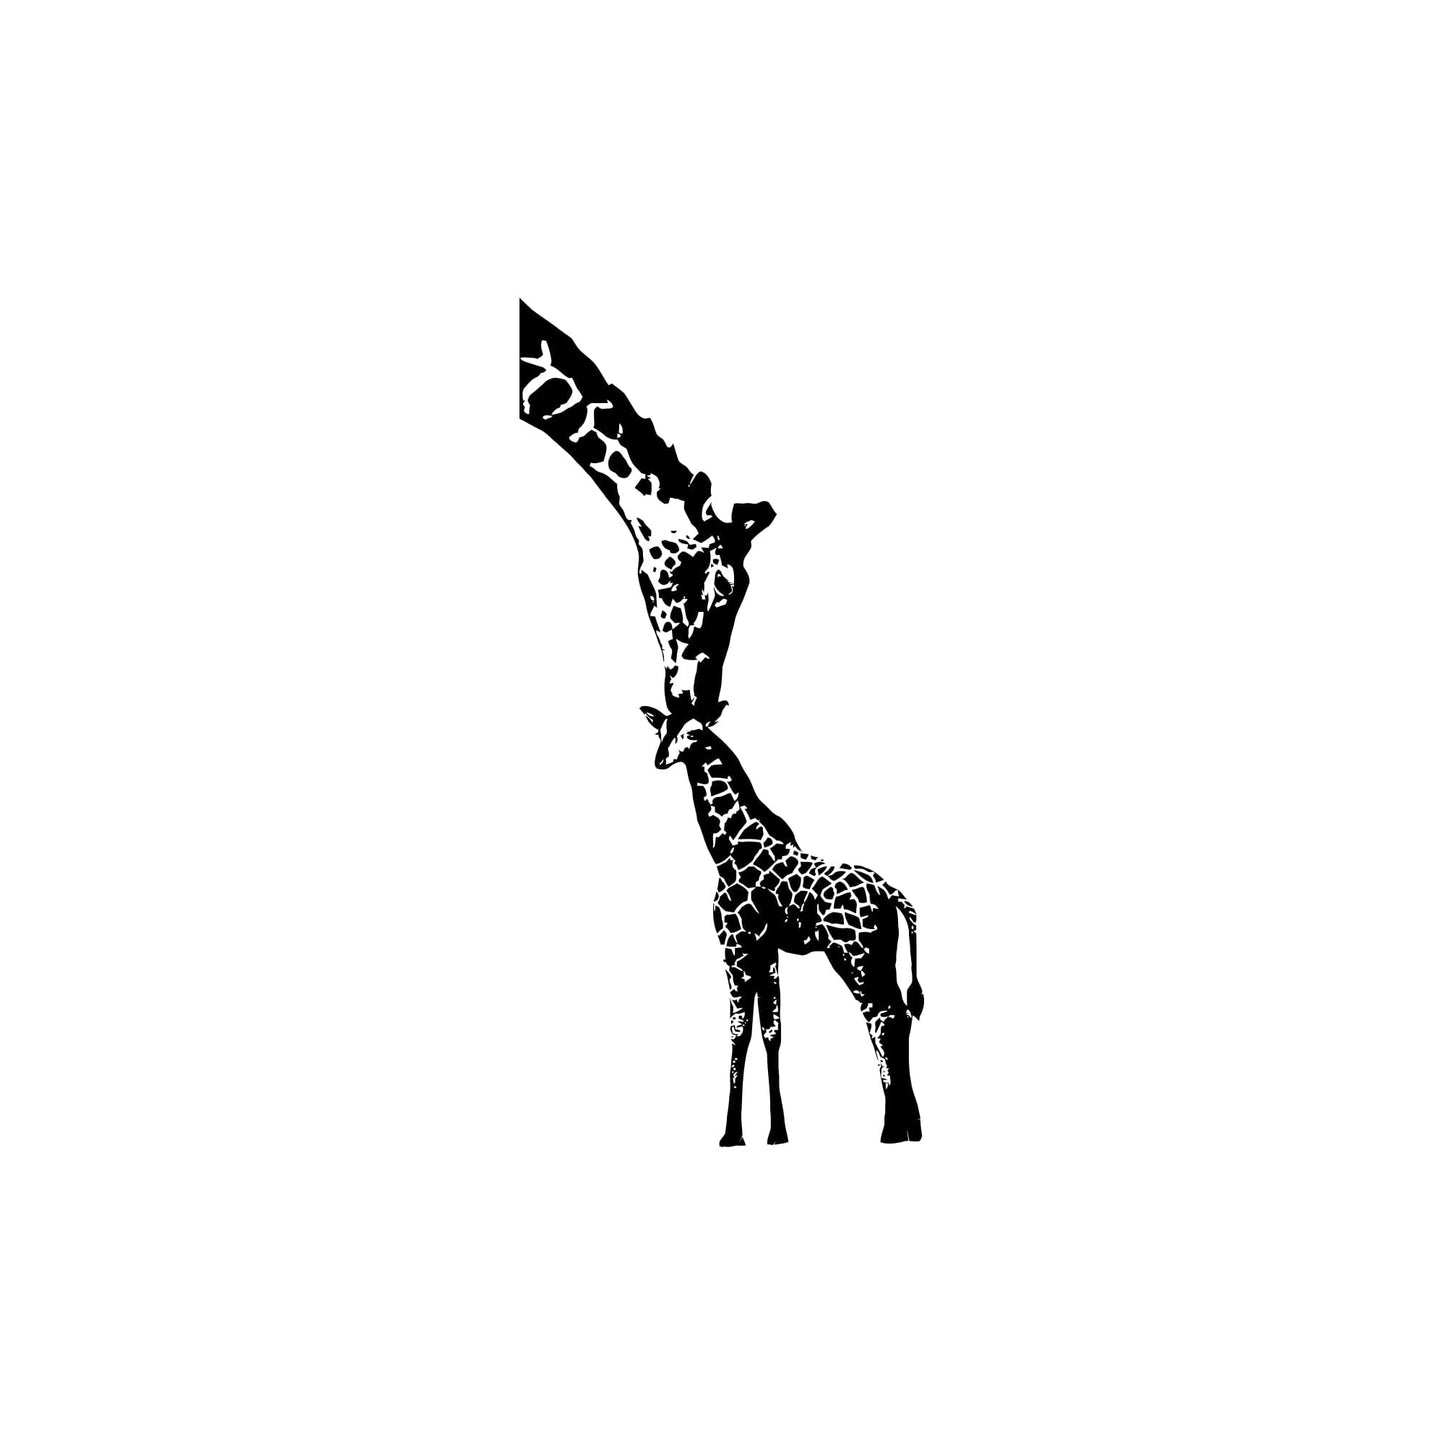 A black adult giraffe and a young giraffe decal on a white background.